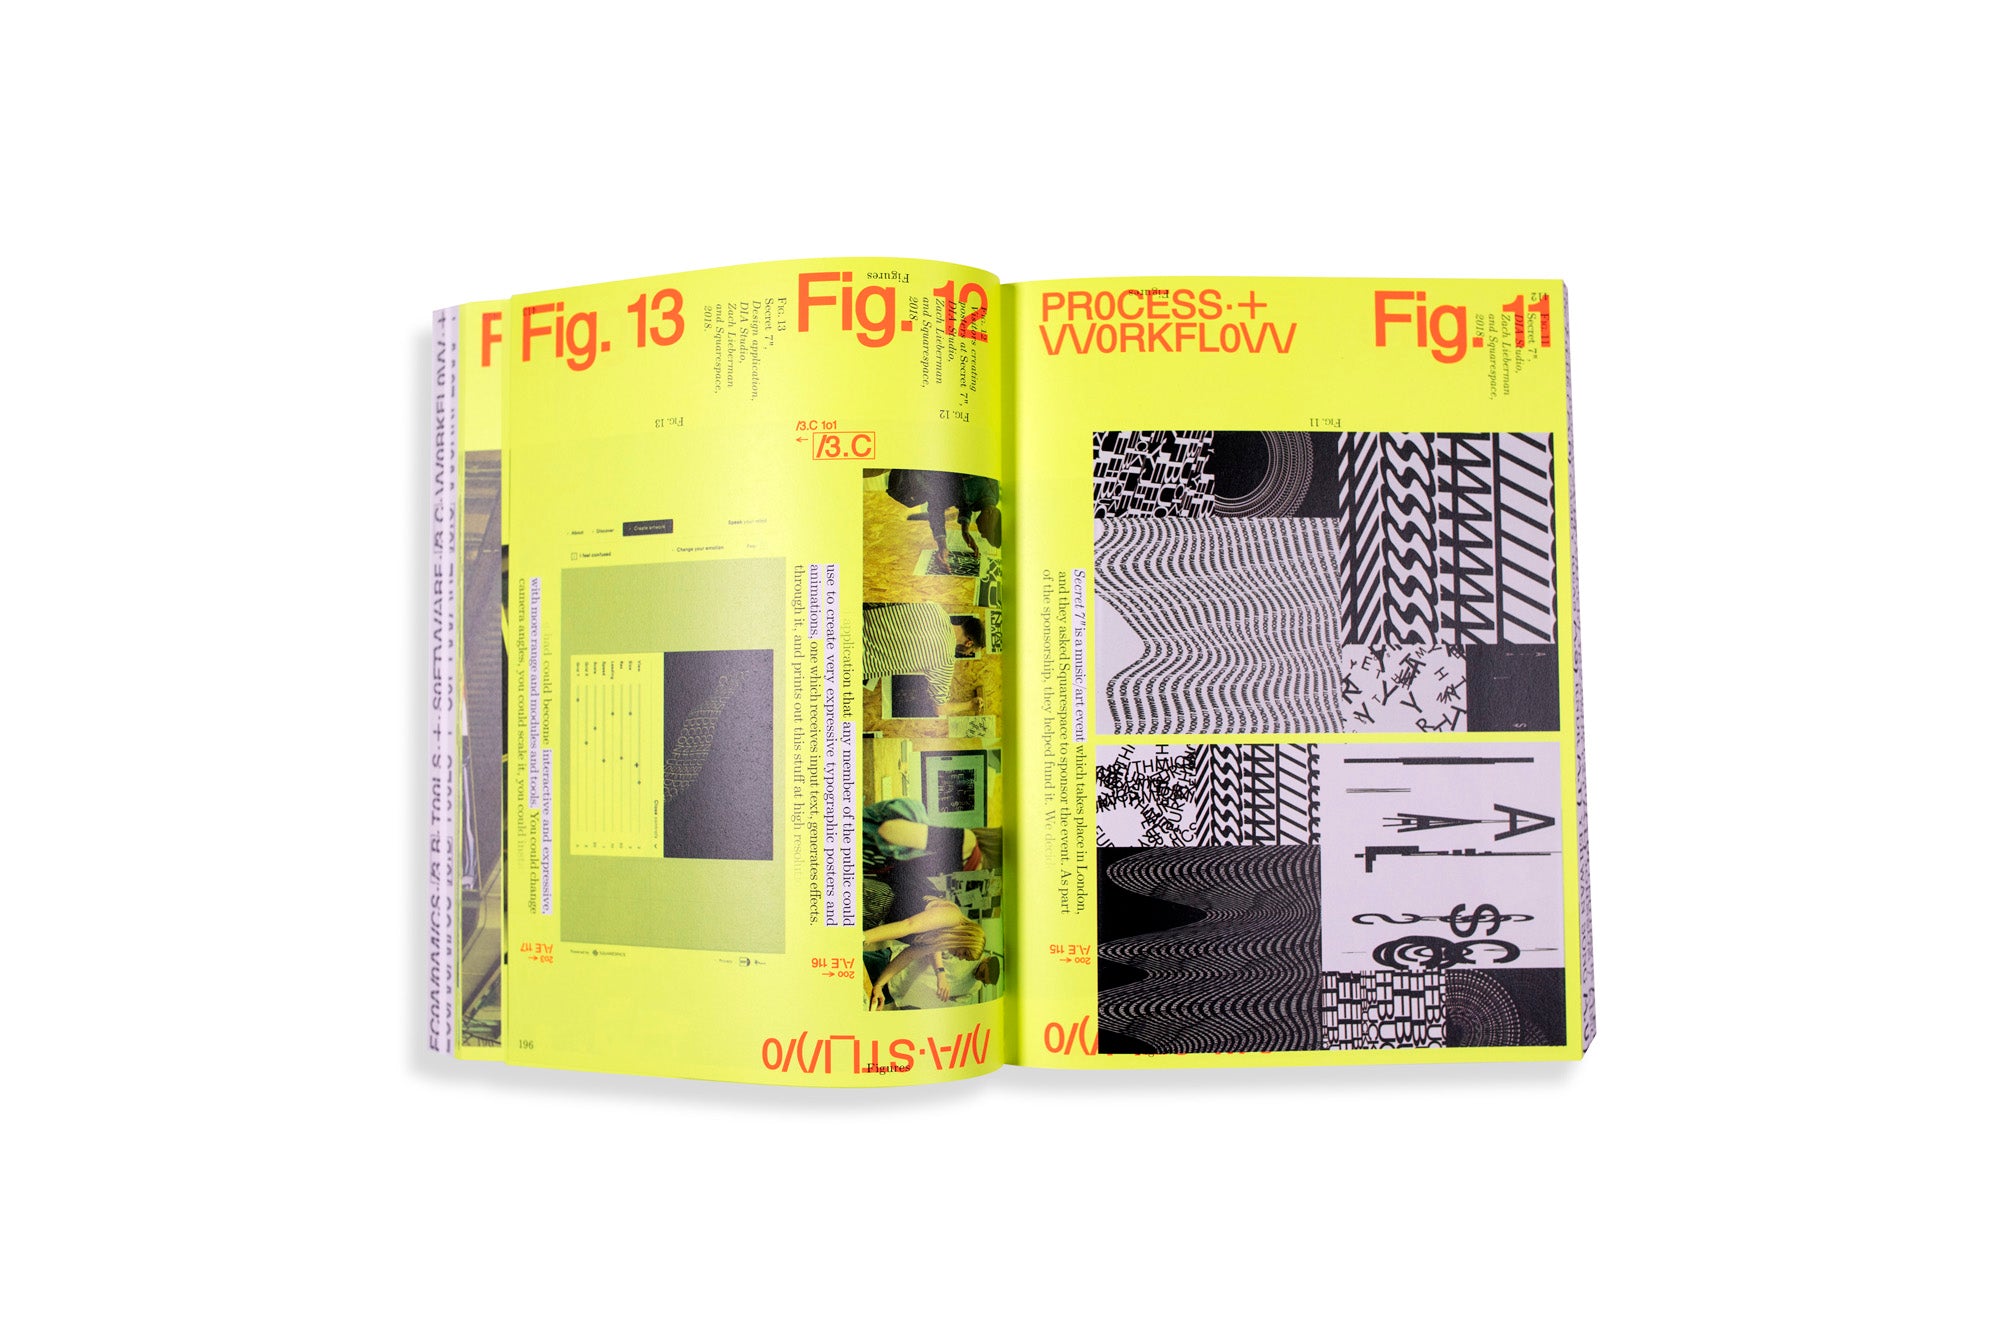 Graphic Design in the Post-Digital Age - A survey of practices fuelled by creative coding